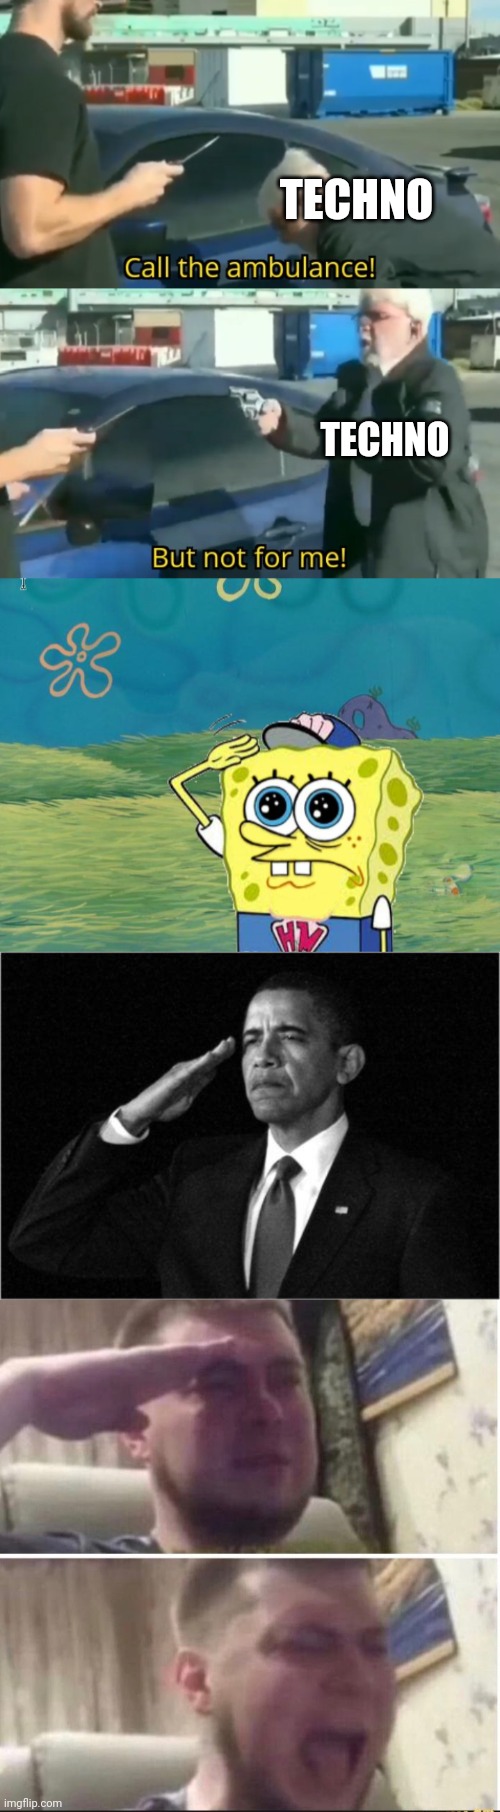 TECHNO; TECHNO | image tagged in call an ambulance but not for me,spongebob salute,obama-salute,crying salute,memes,why | made w/ Imgflip meme maker